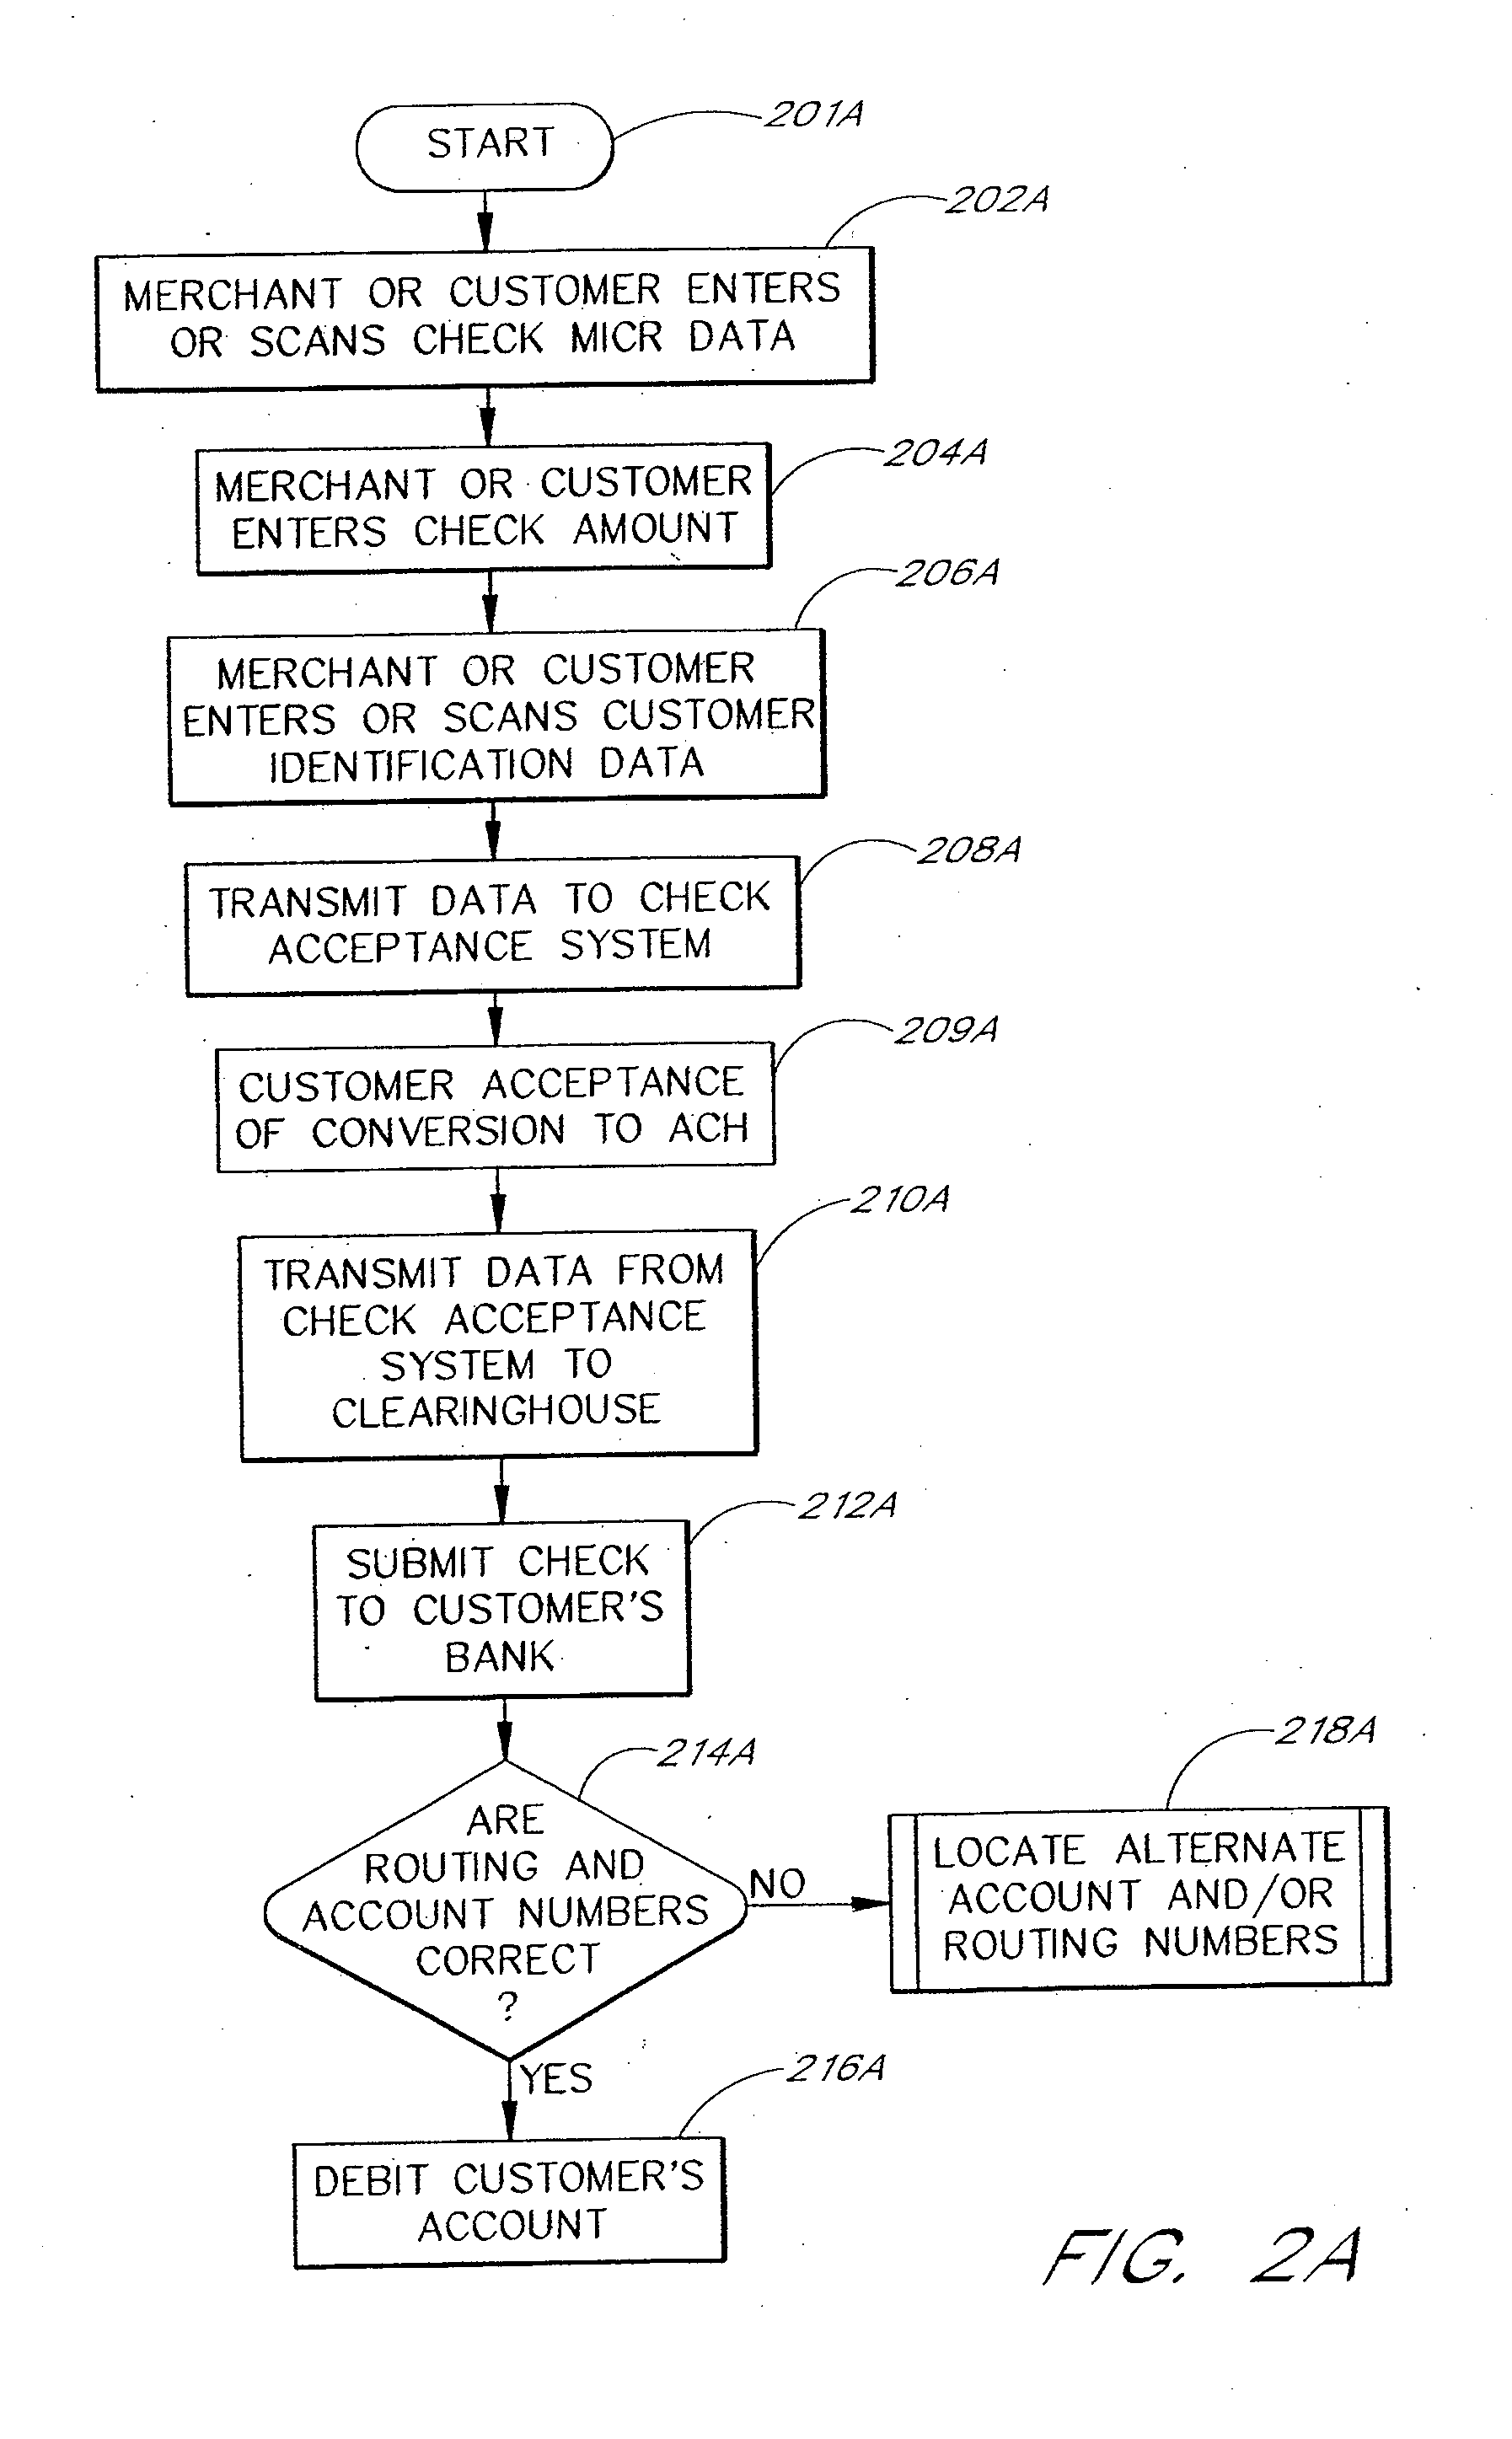 Apparatus and methods for processing misread or miskeyed magnetic indicia